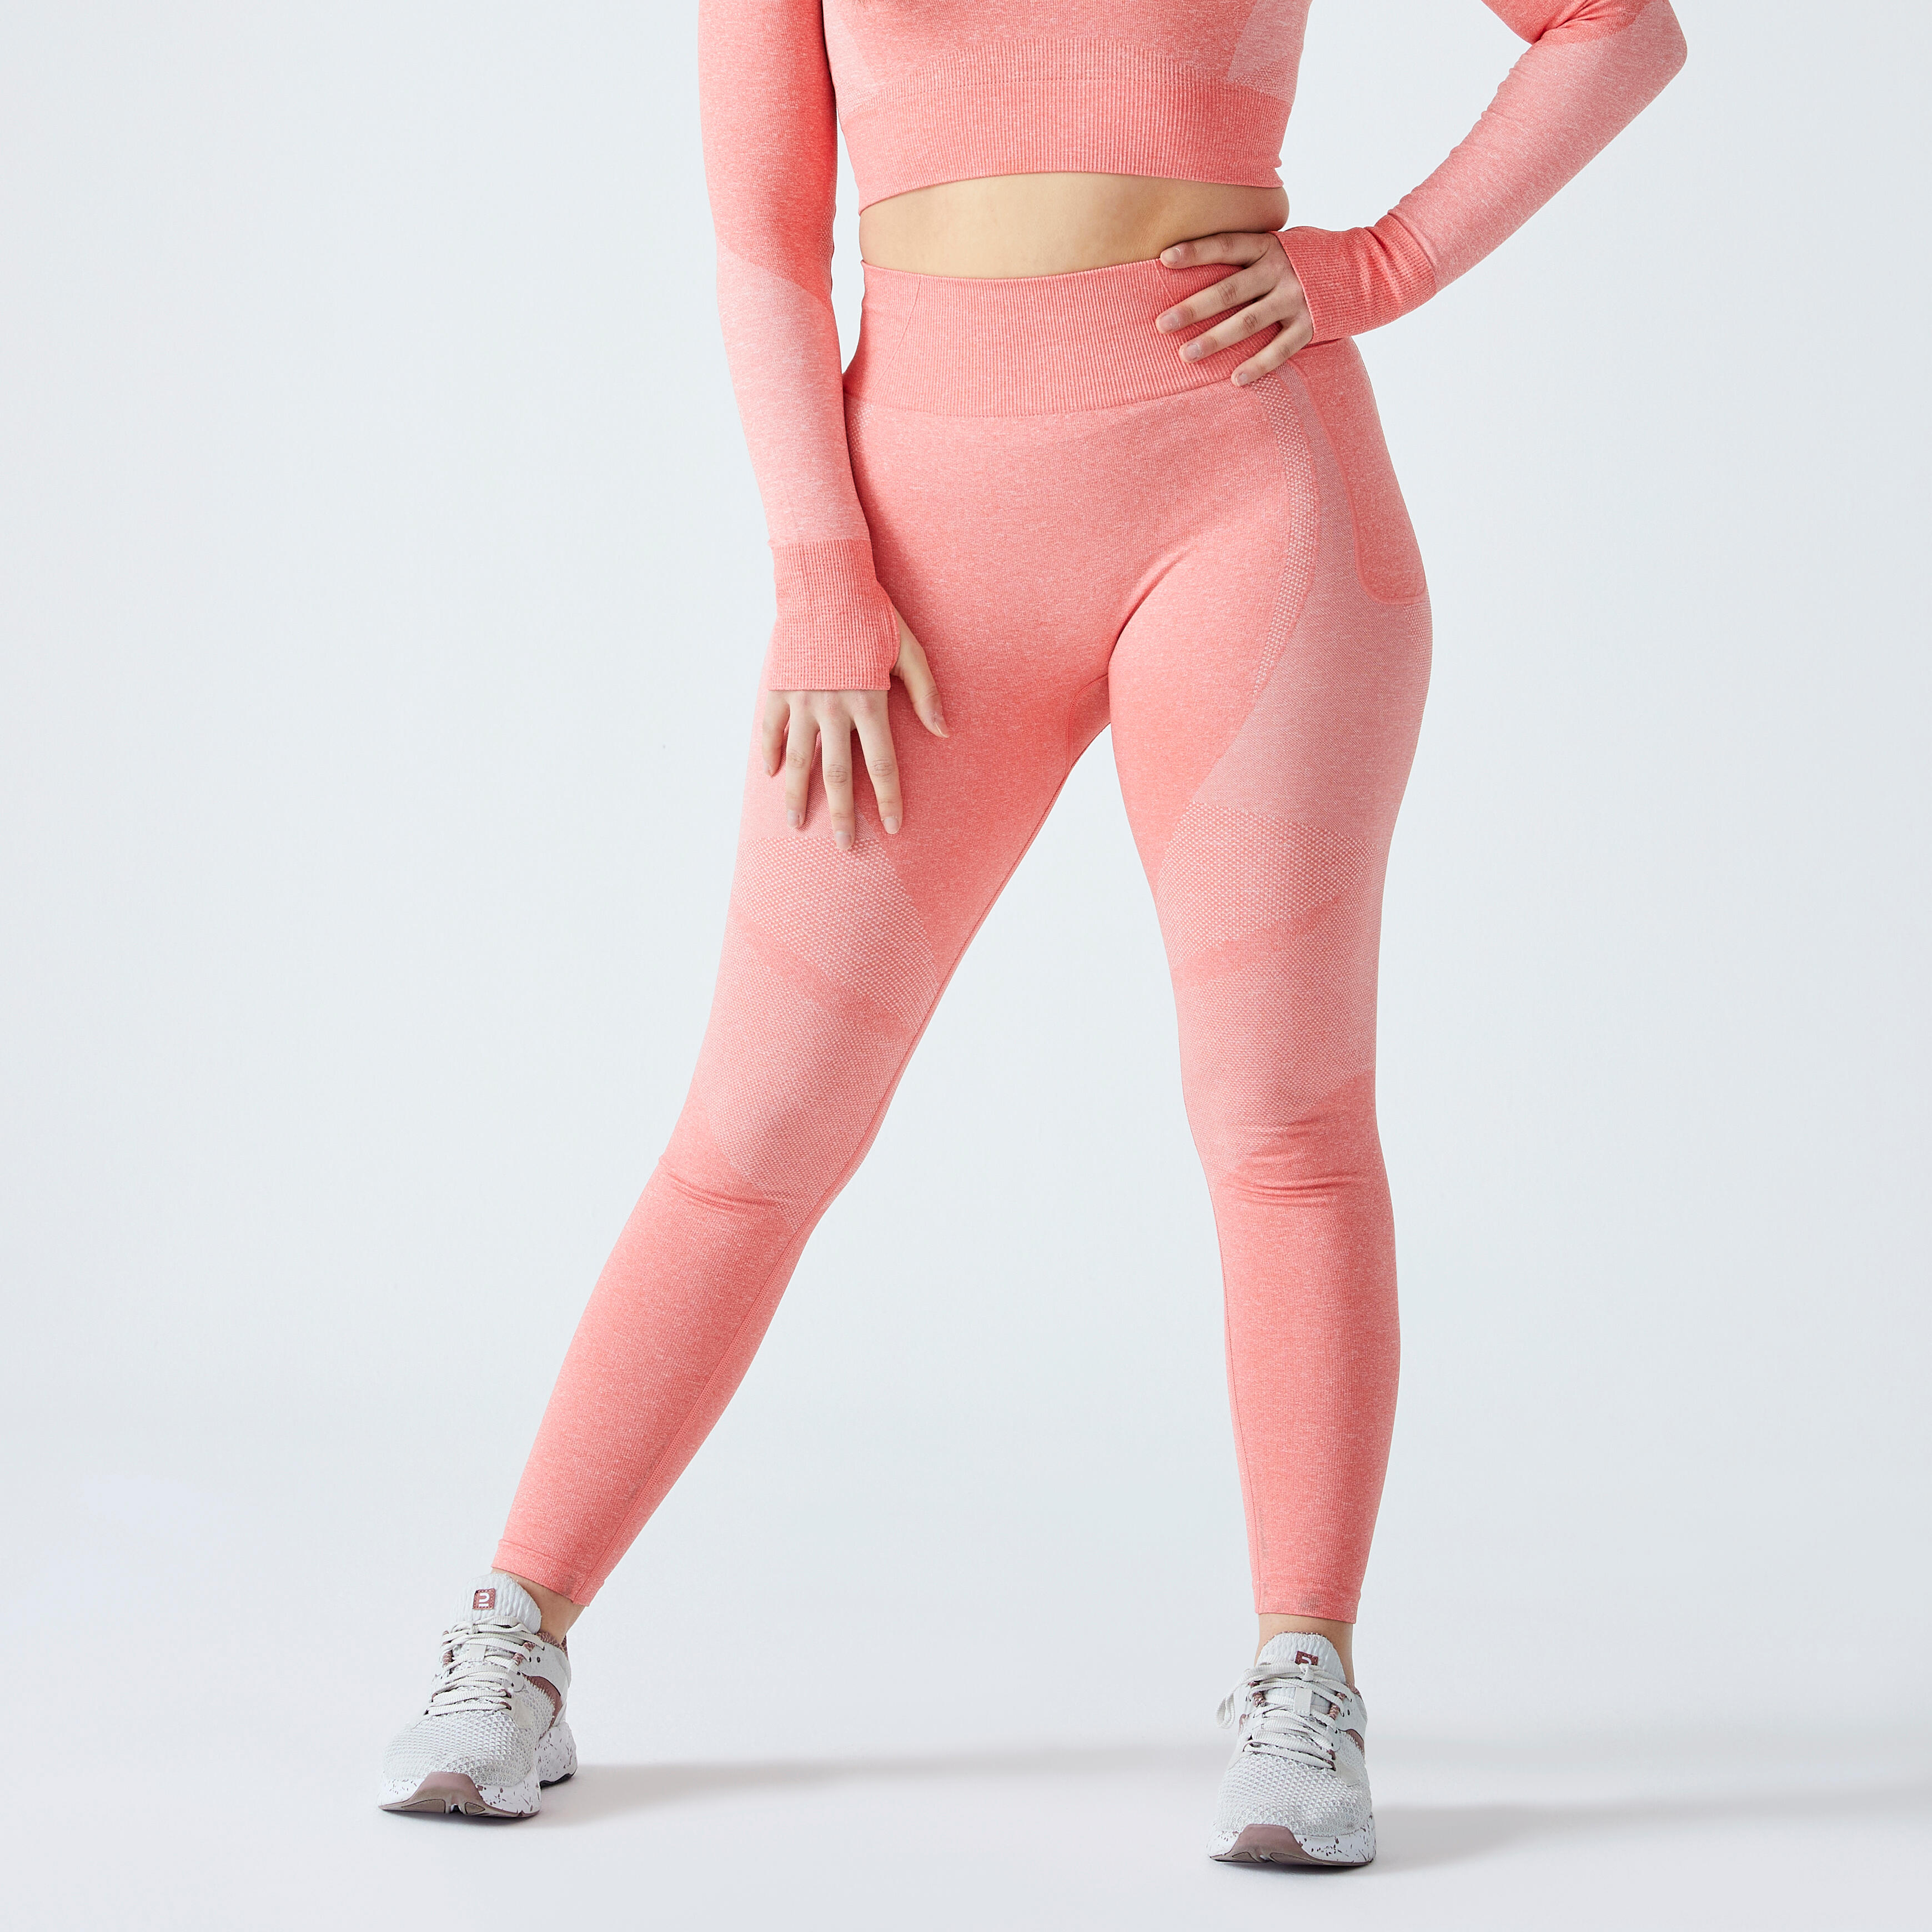 pink gym leggings, pink gym leggings Suppliers and Manufacturers at